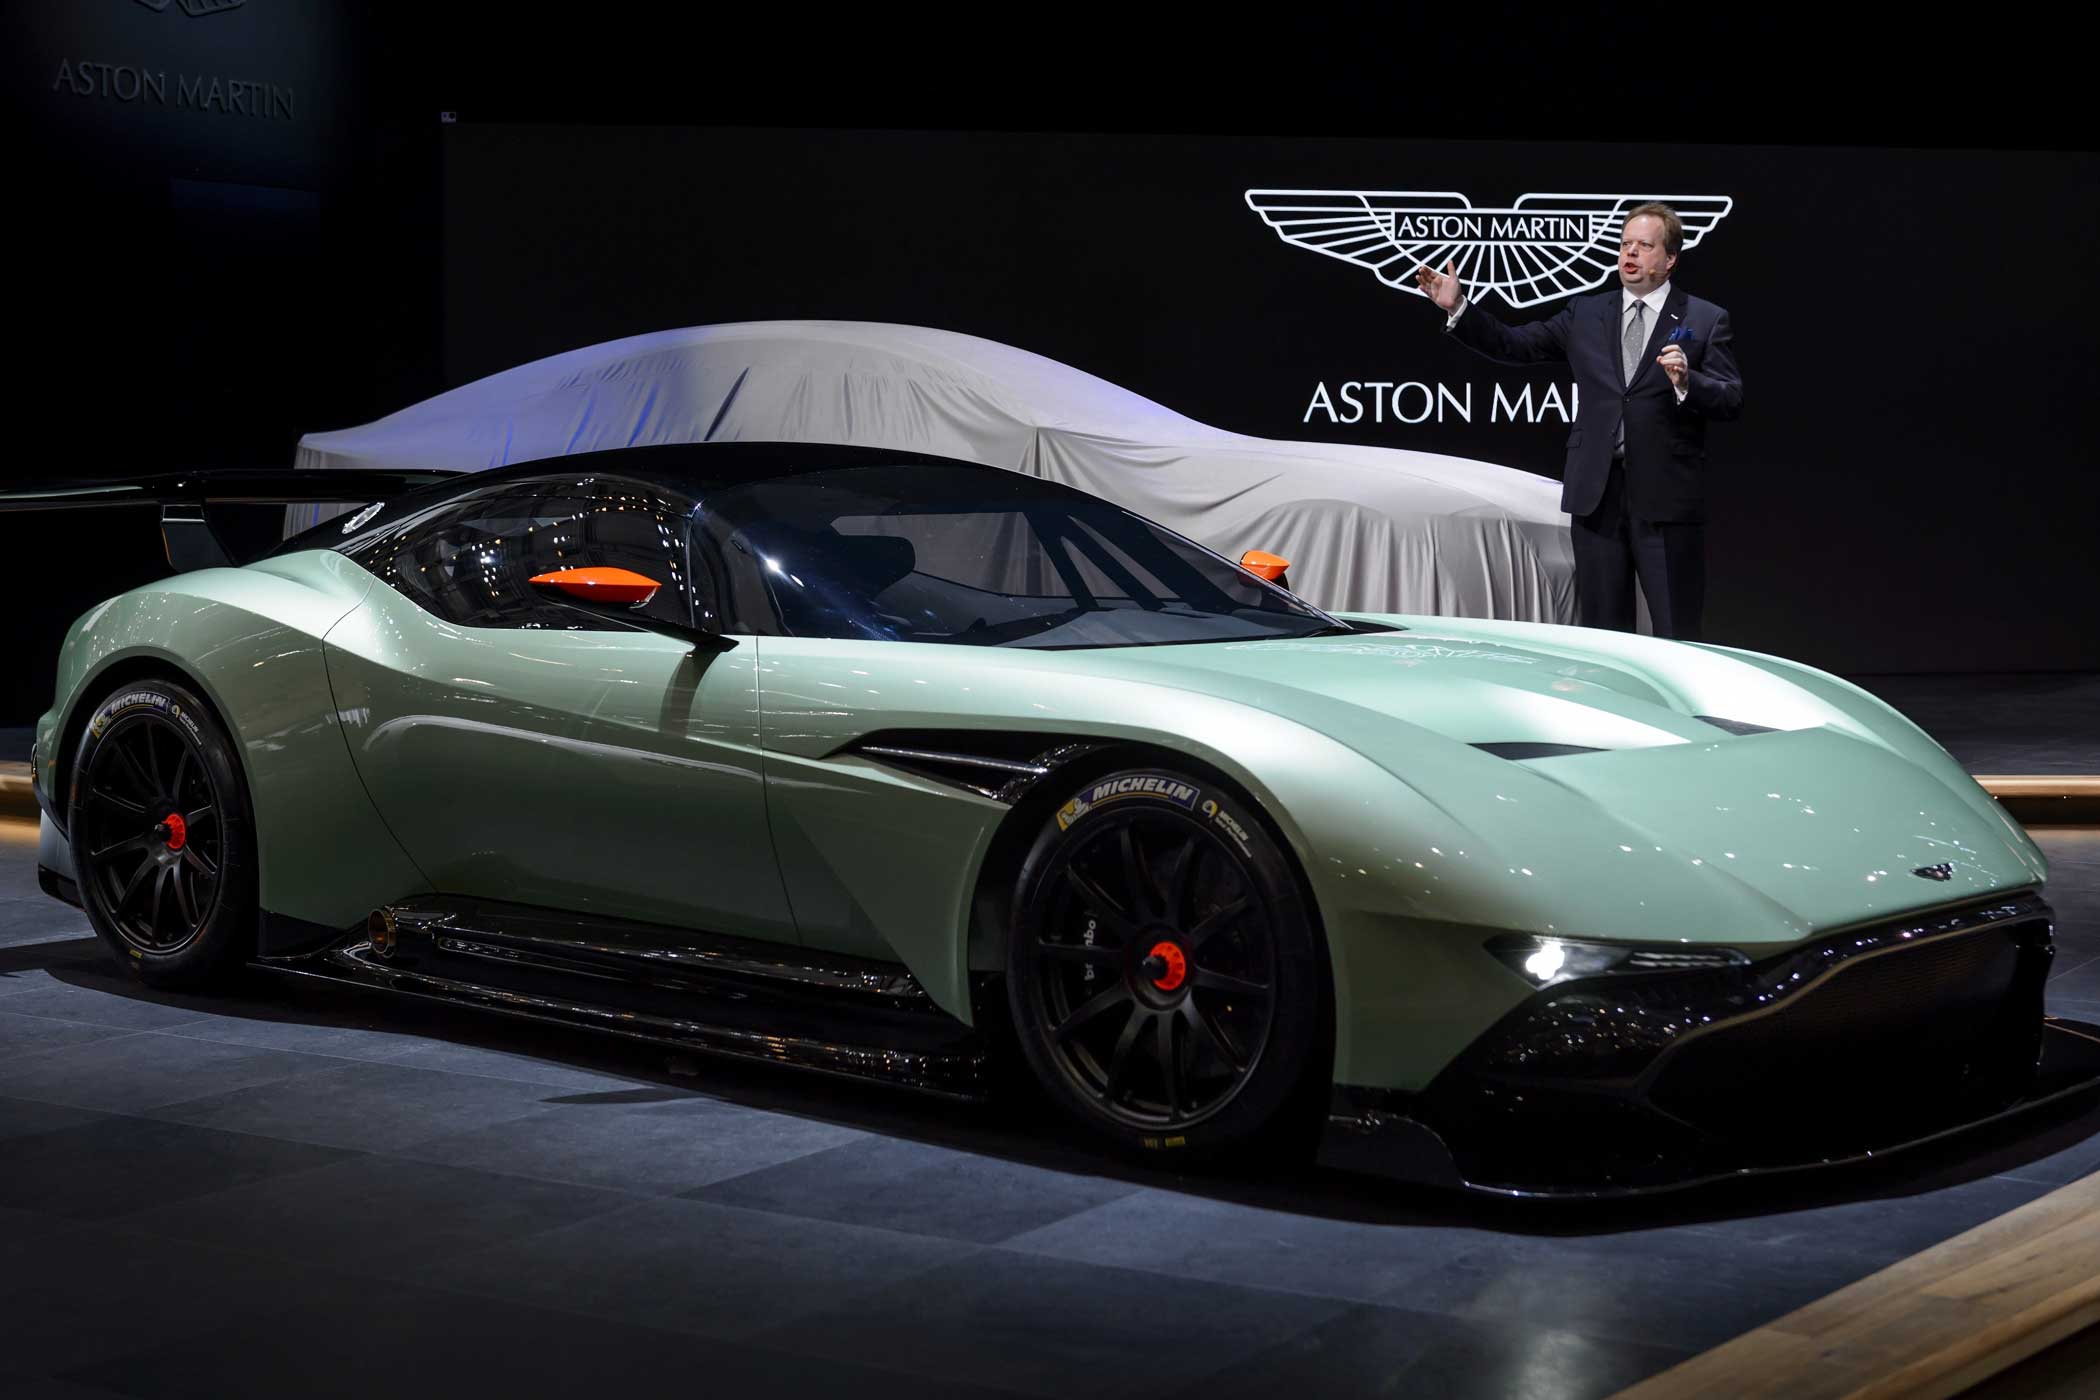 Aston Martin CEO Andy Palmer unveils the new Aston Martin Vulcan model on March 3, 2015 during the press day of the Geneva Car Show in Geneva.